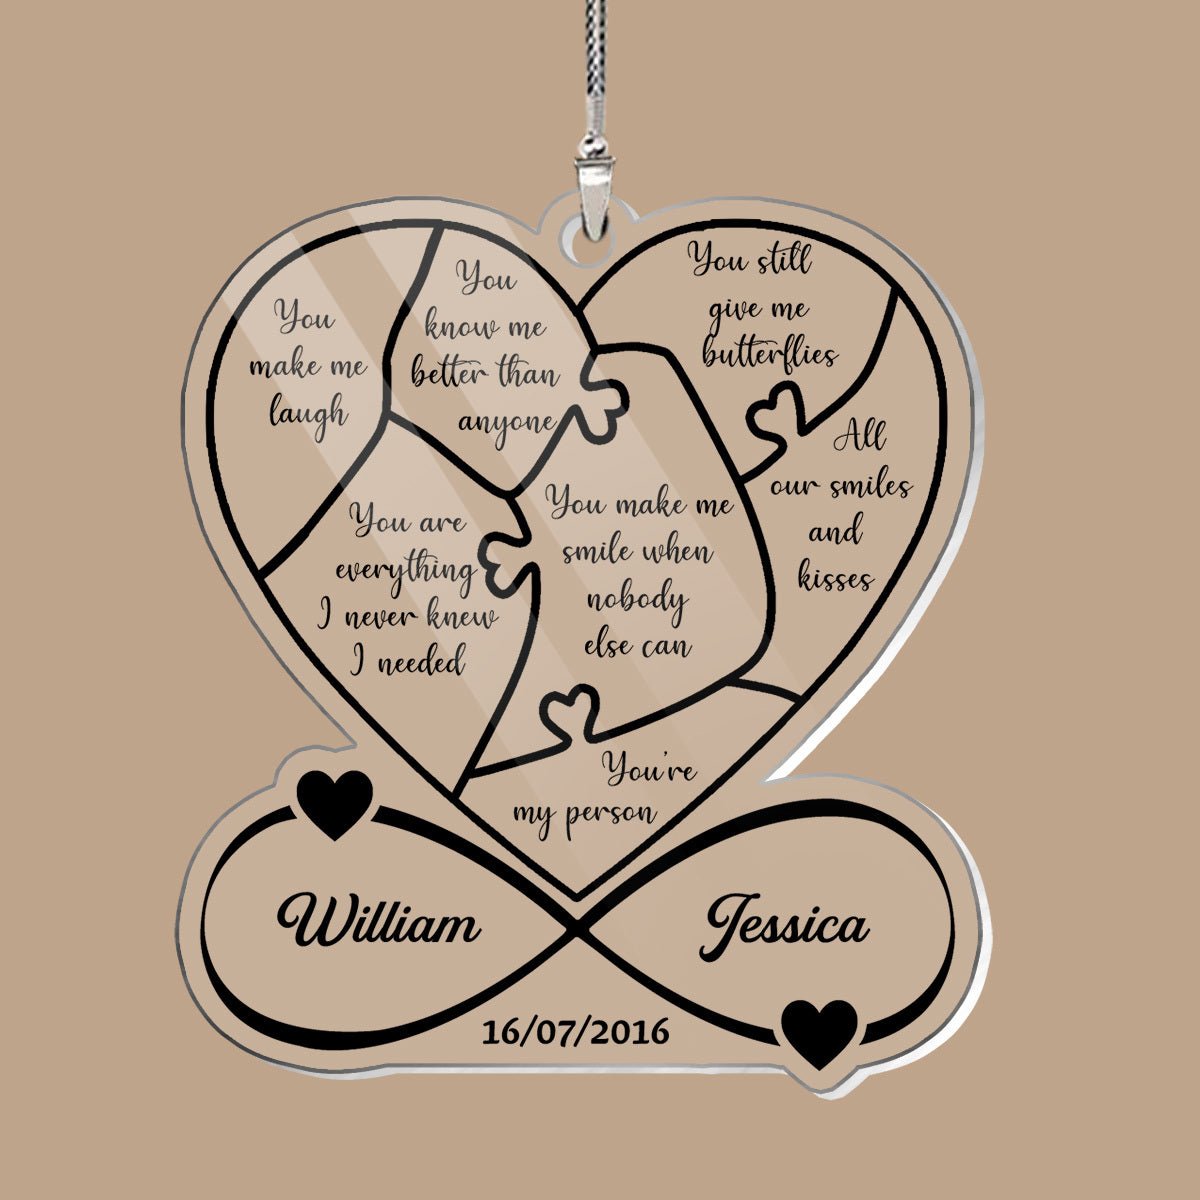 Reasons Why I Love You - Personalized Acrylic Car Ornament - Best Gift for Valentine's Day - Giftago